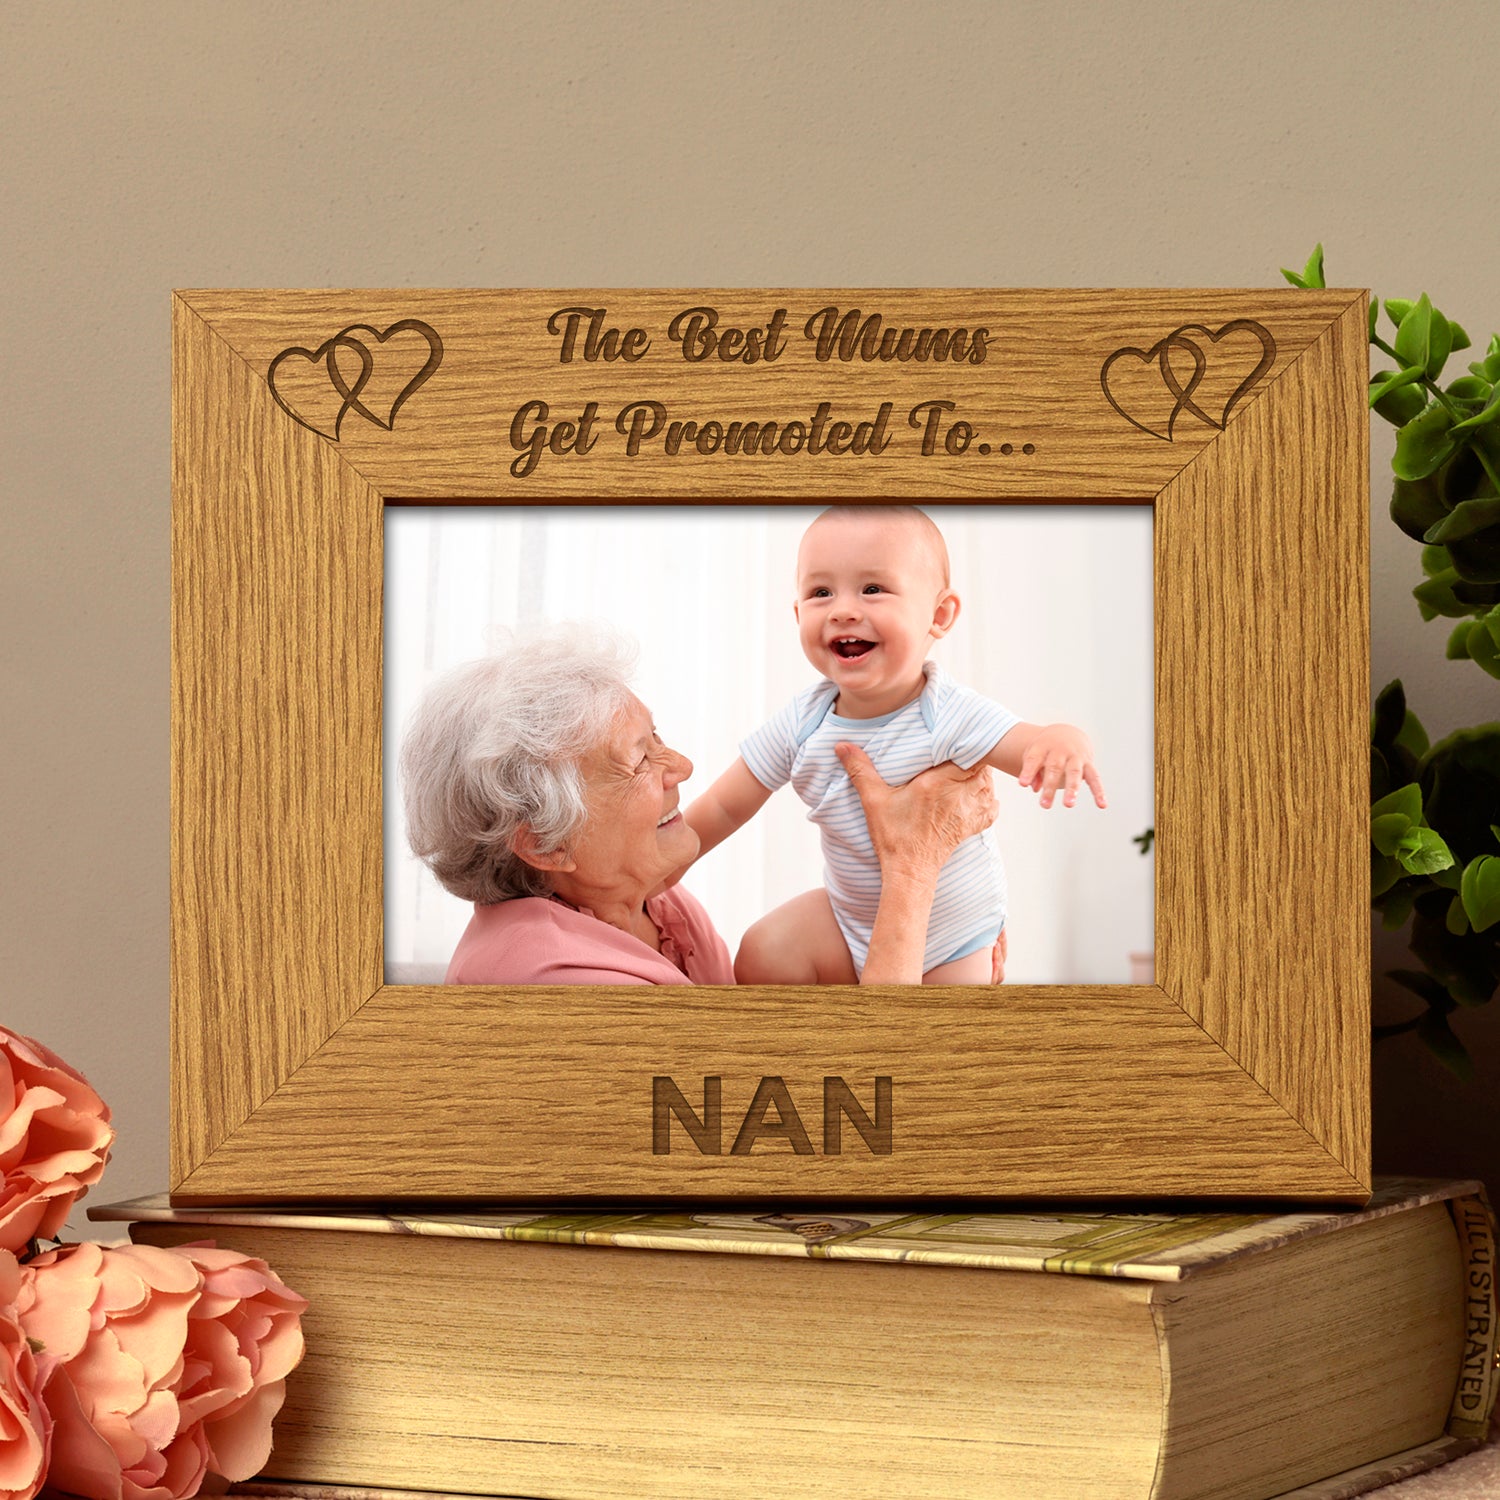 Best Mums Get Promoted To Nan Wooden Photo Frame Gift - ukgiftstoreonline